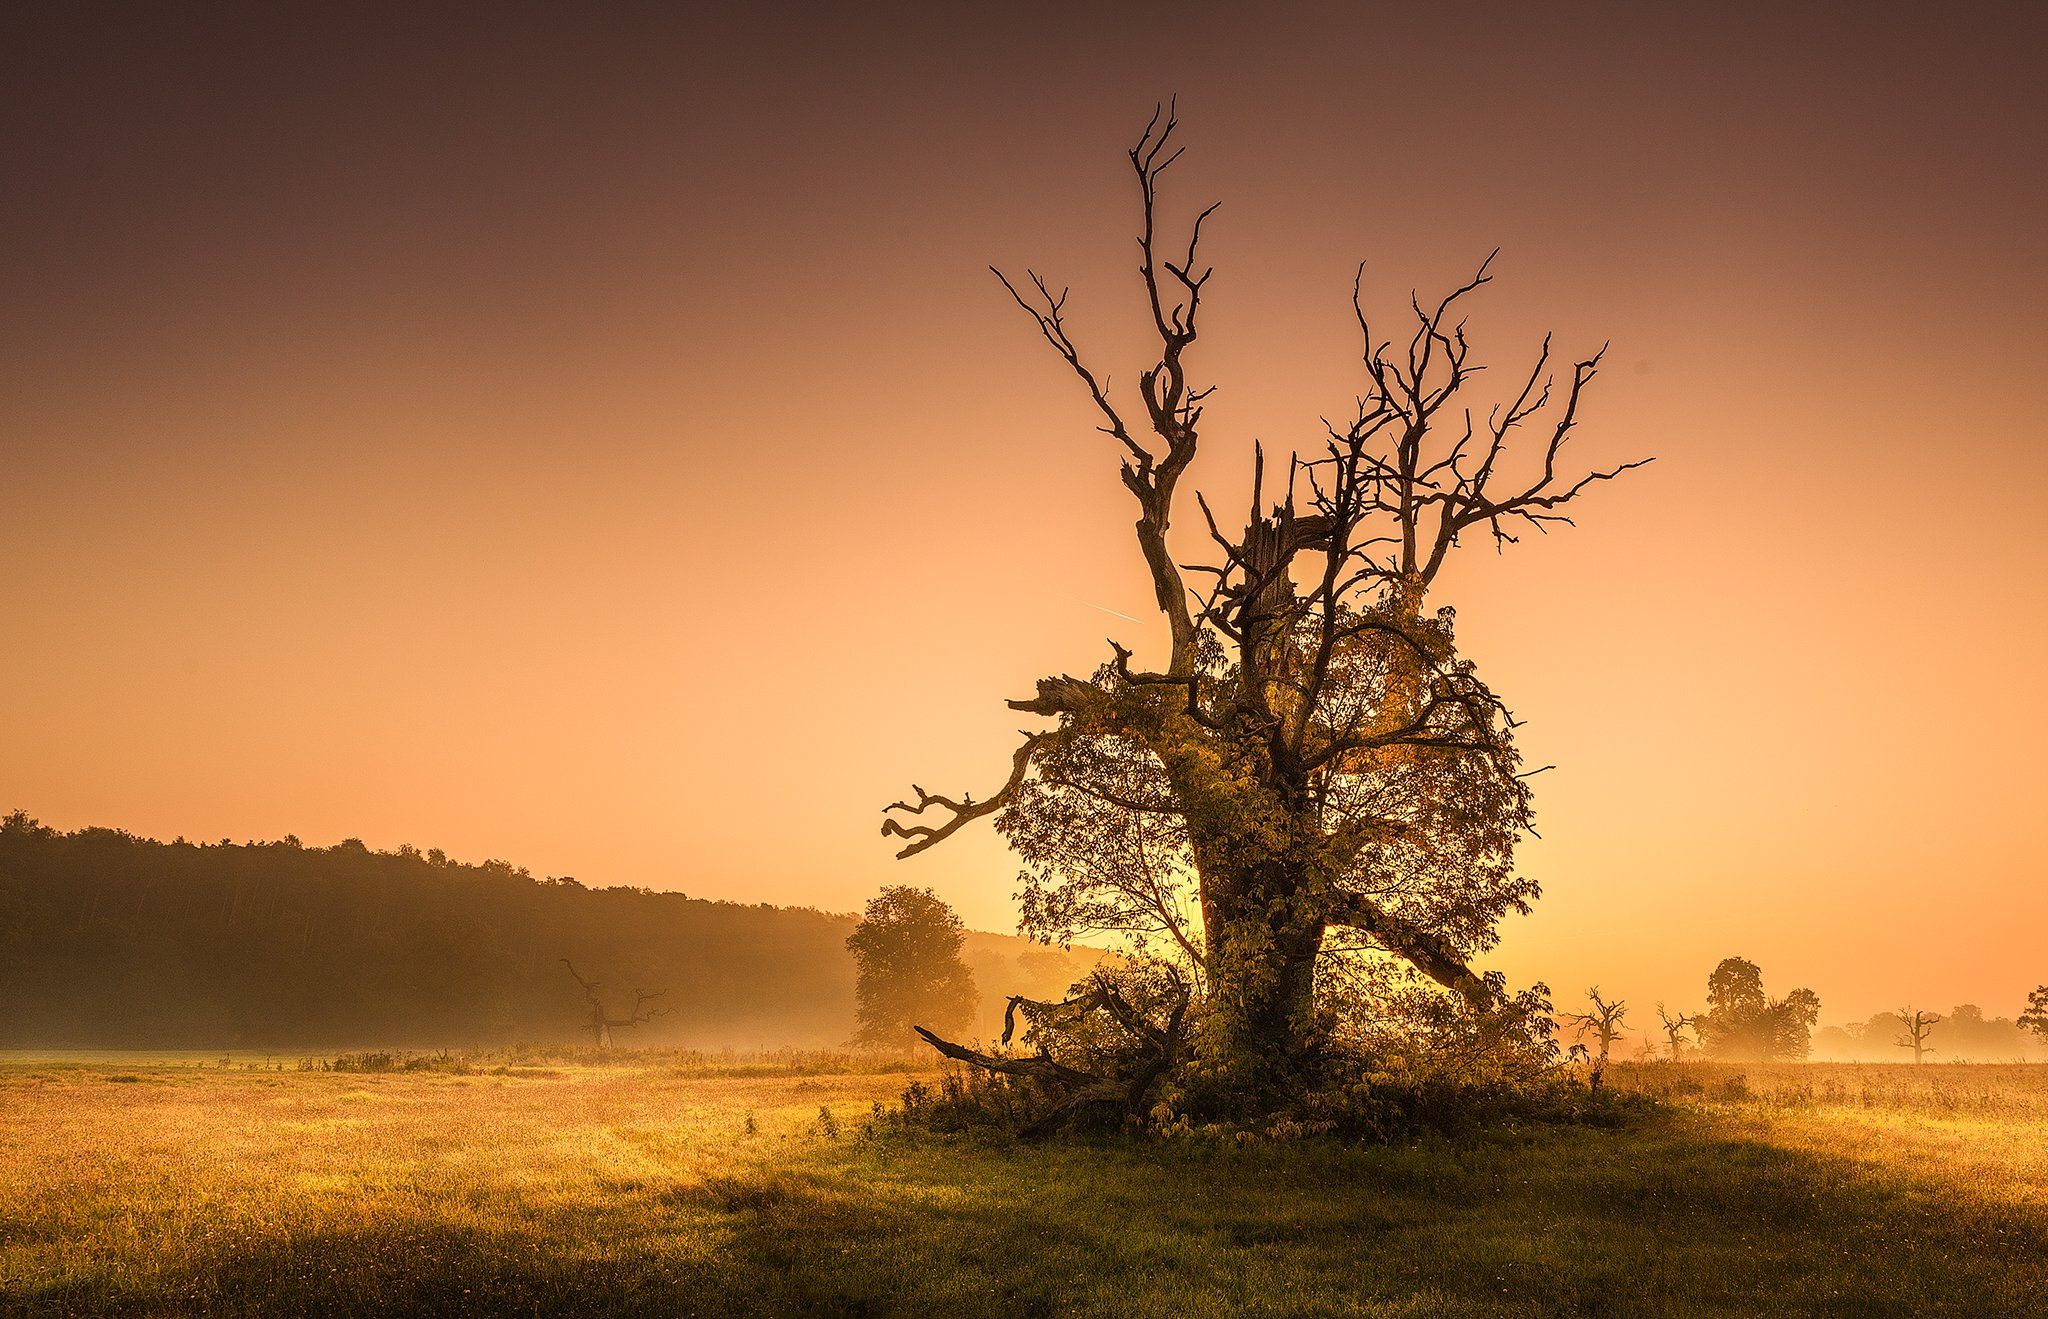 500 years oak eagle in the national park rogalin in poland, Pawel Olejniczak